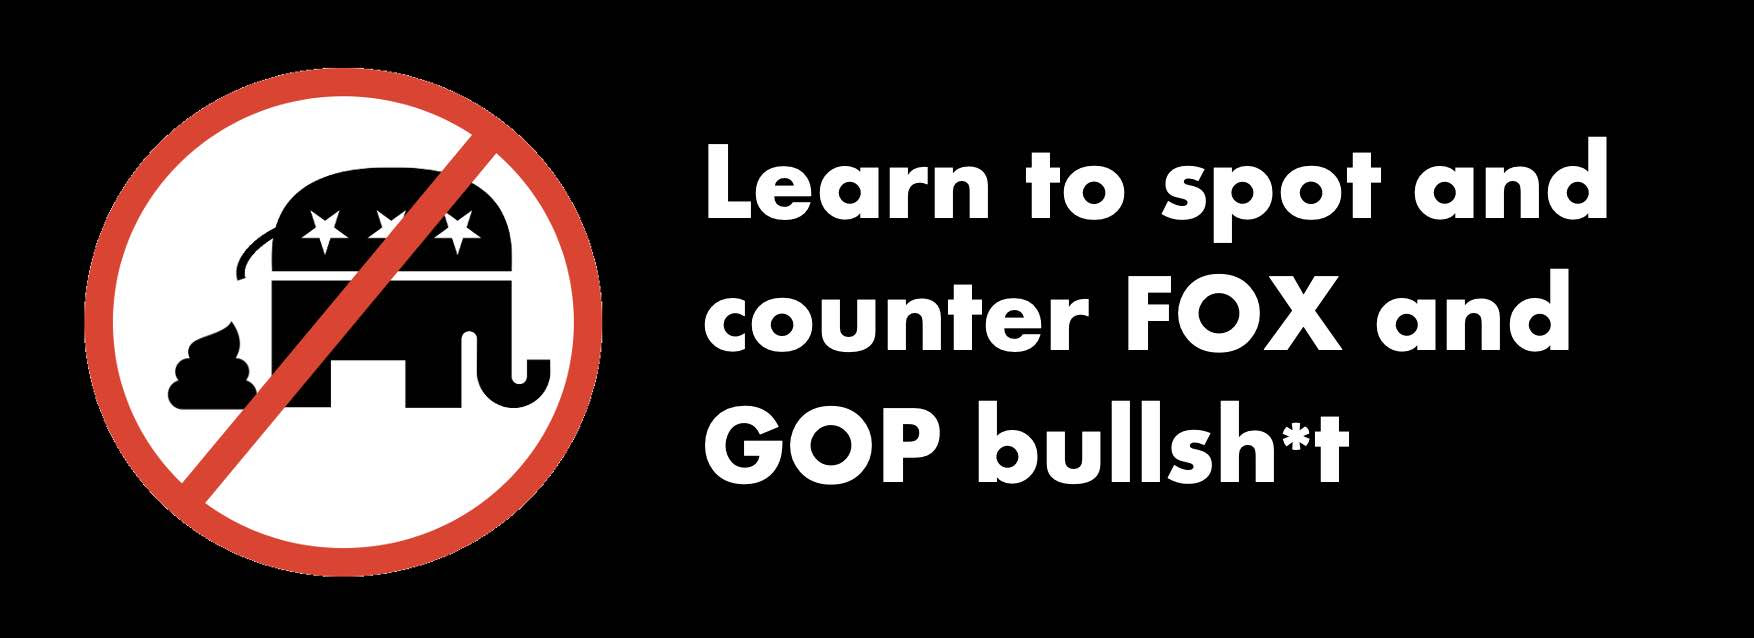 Learn to spot and counter GOP and FOX bullshit